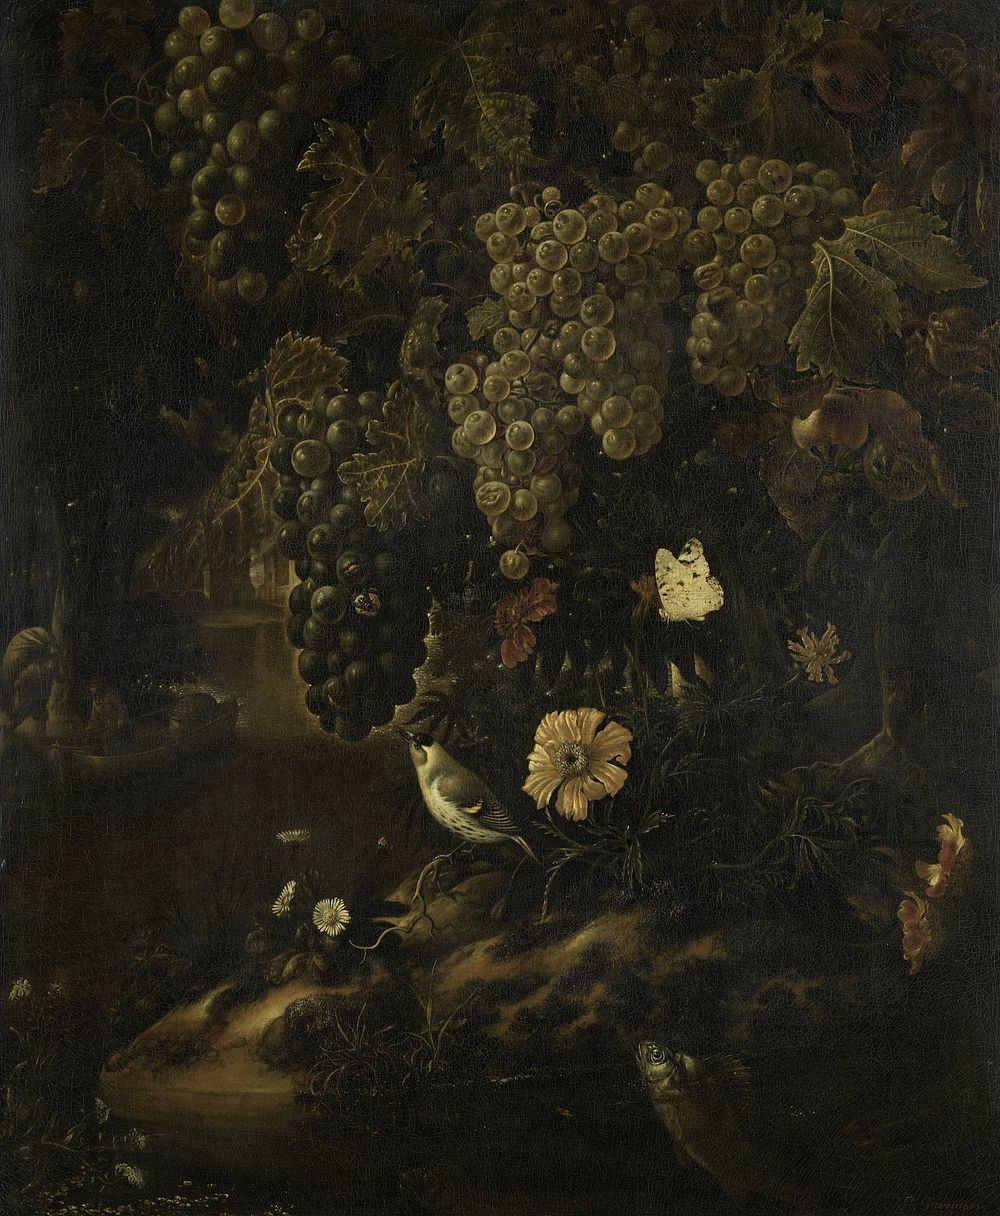 Grapes, Flowers and Animals (1665 - 1719) by Isac Vromans